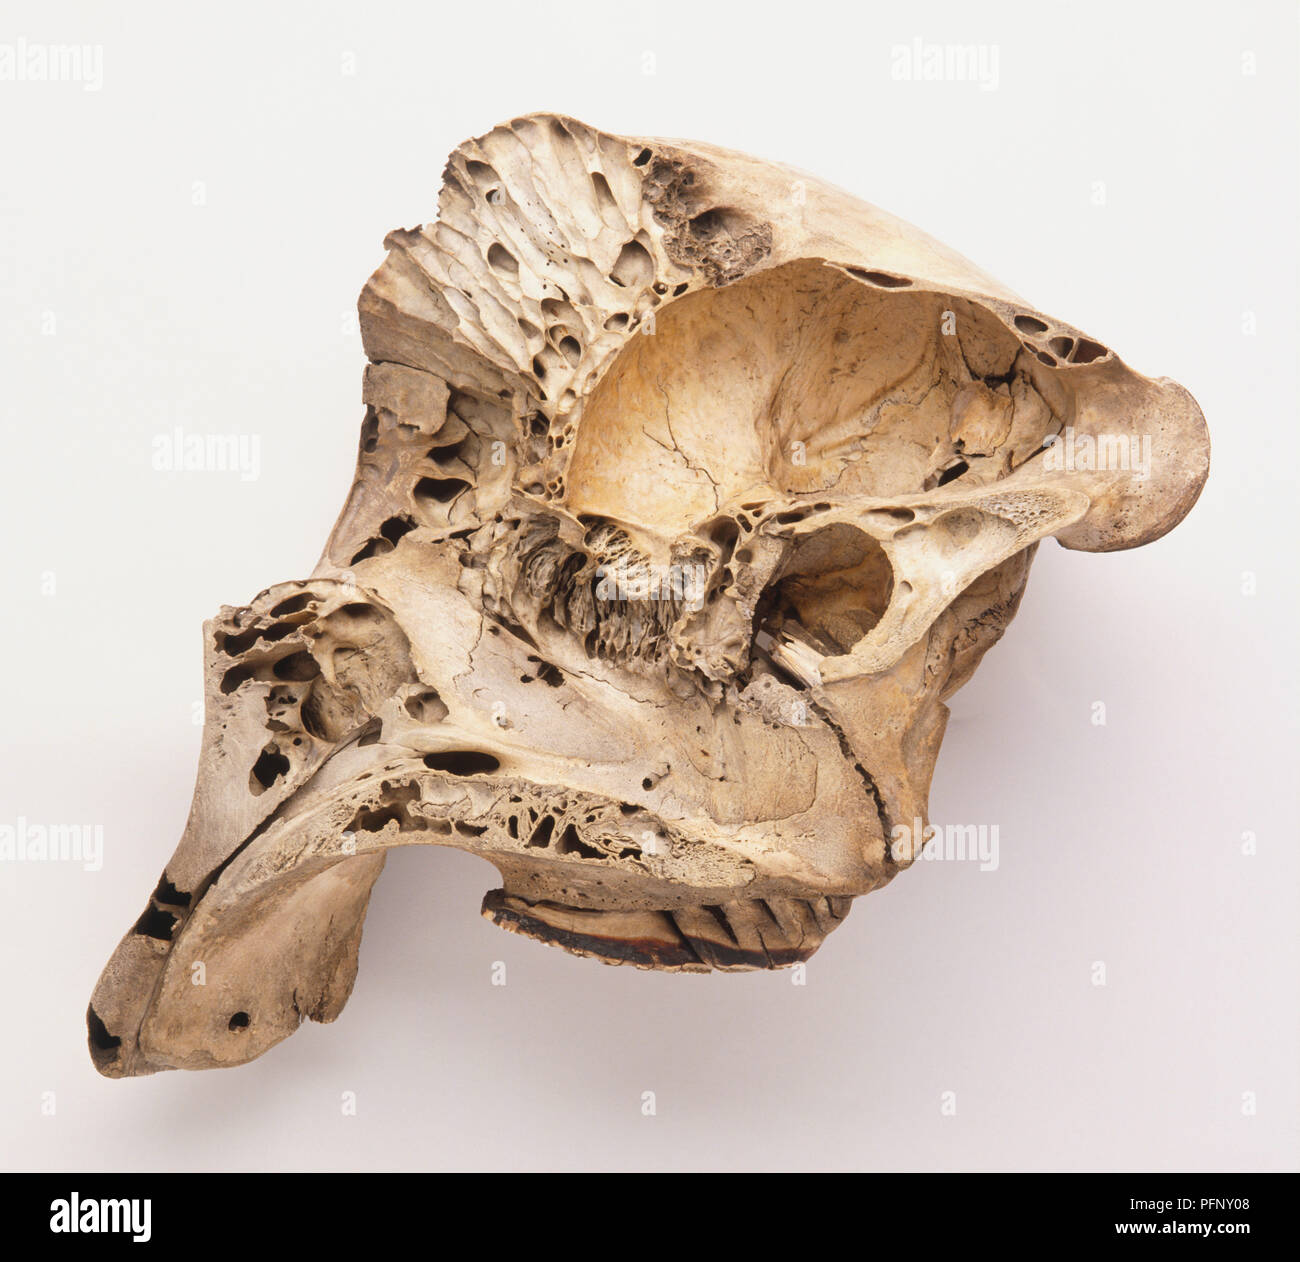 Loxodonta africana, african elephant skull in side view that has been cut vertically in the midline, showing the honeycomb structure that reduces the weight, and the brain cavity. Stock Photo